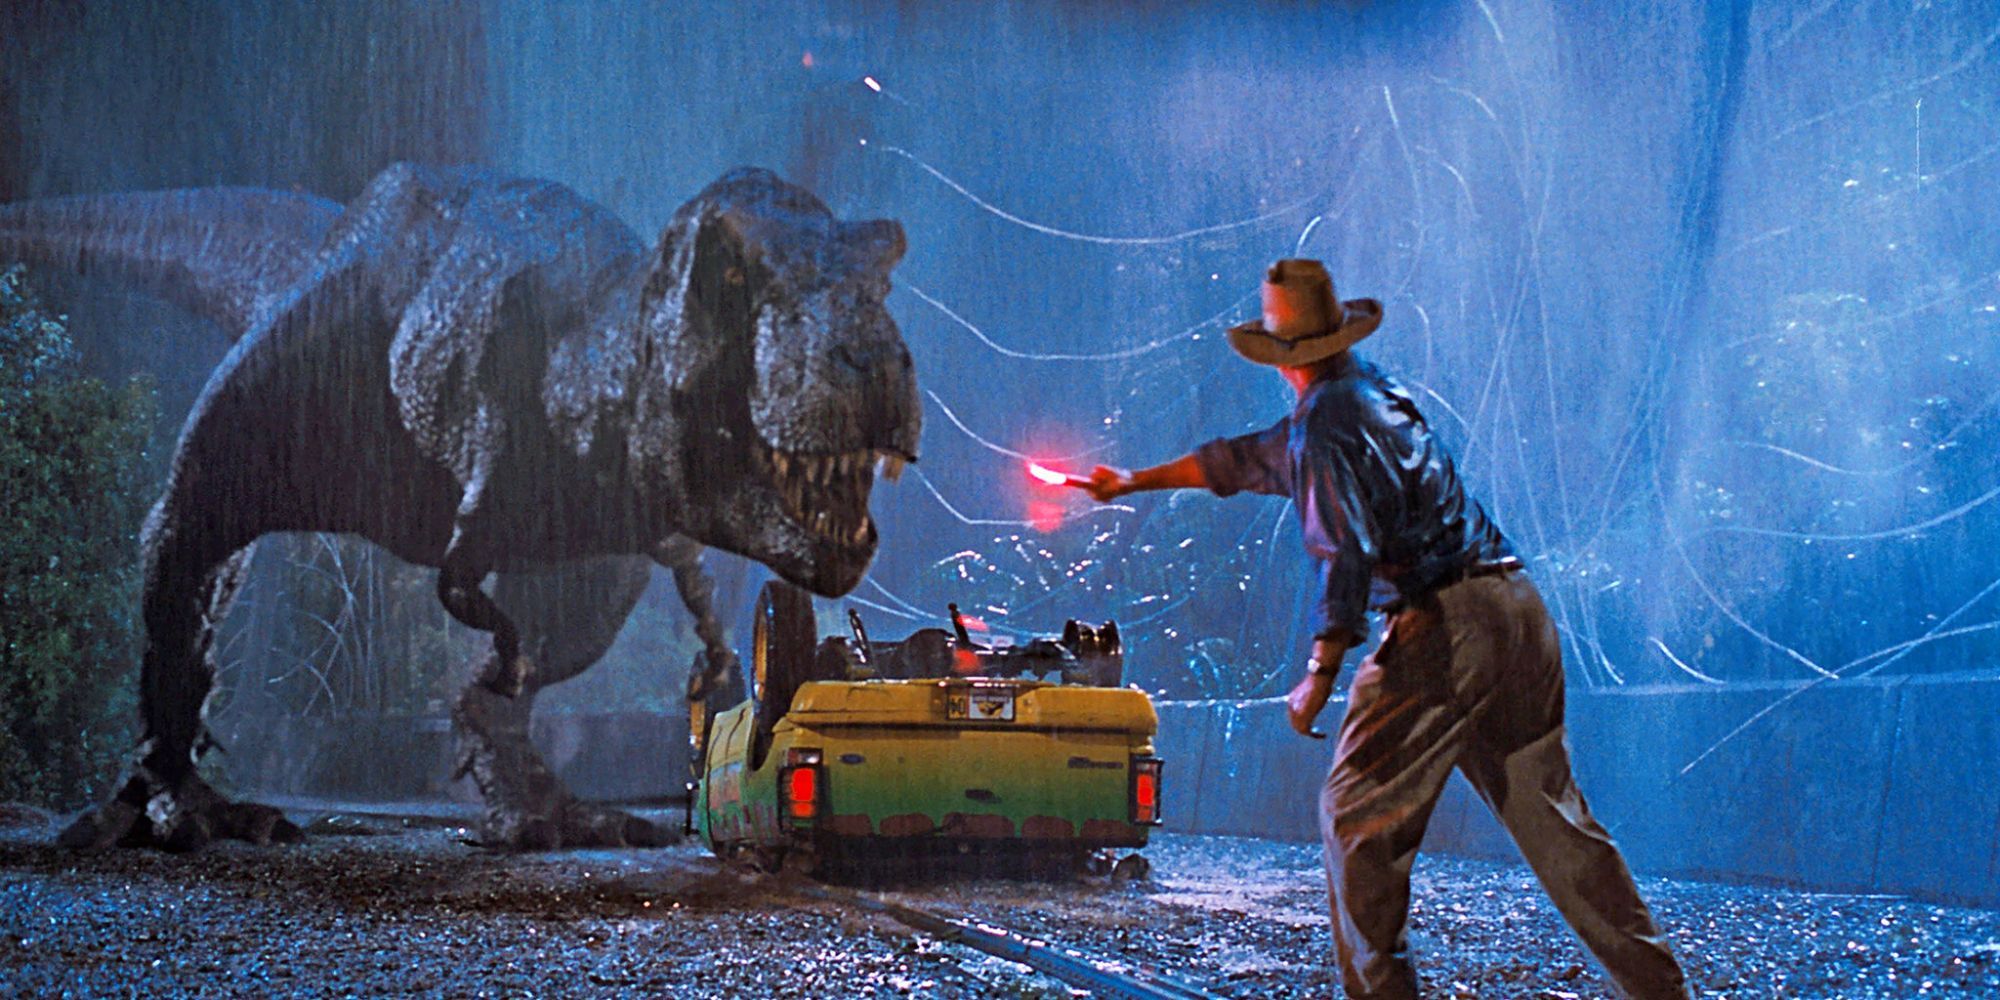 Alan Grant has distracted the T-Rex in 'Jurassic Park'